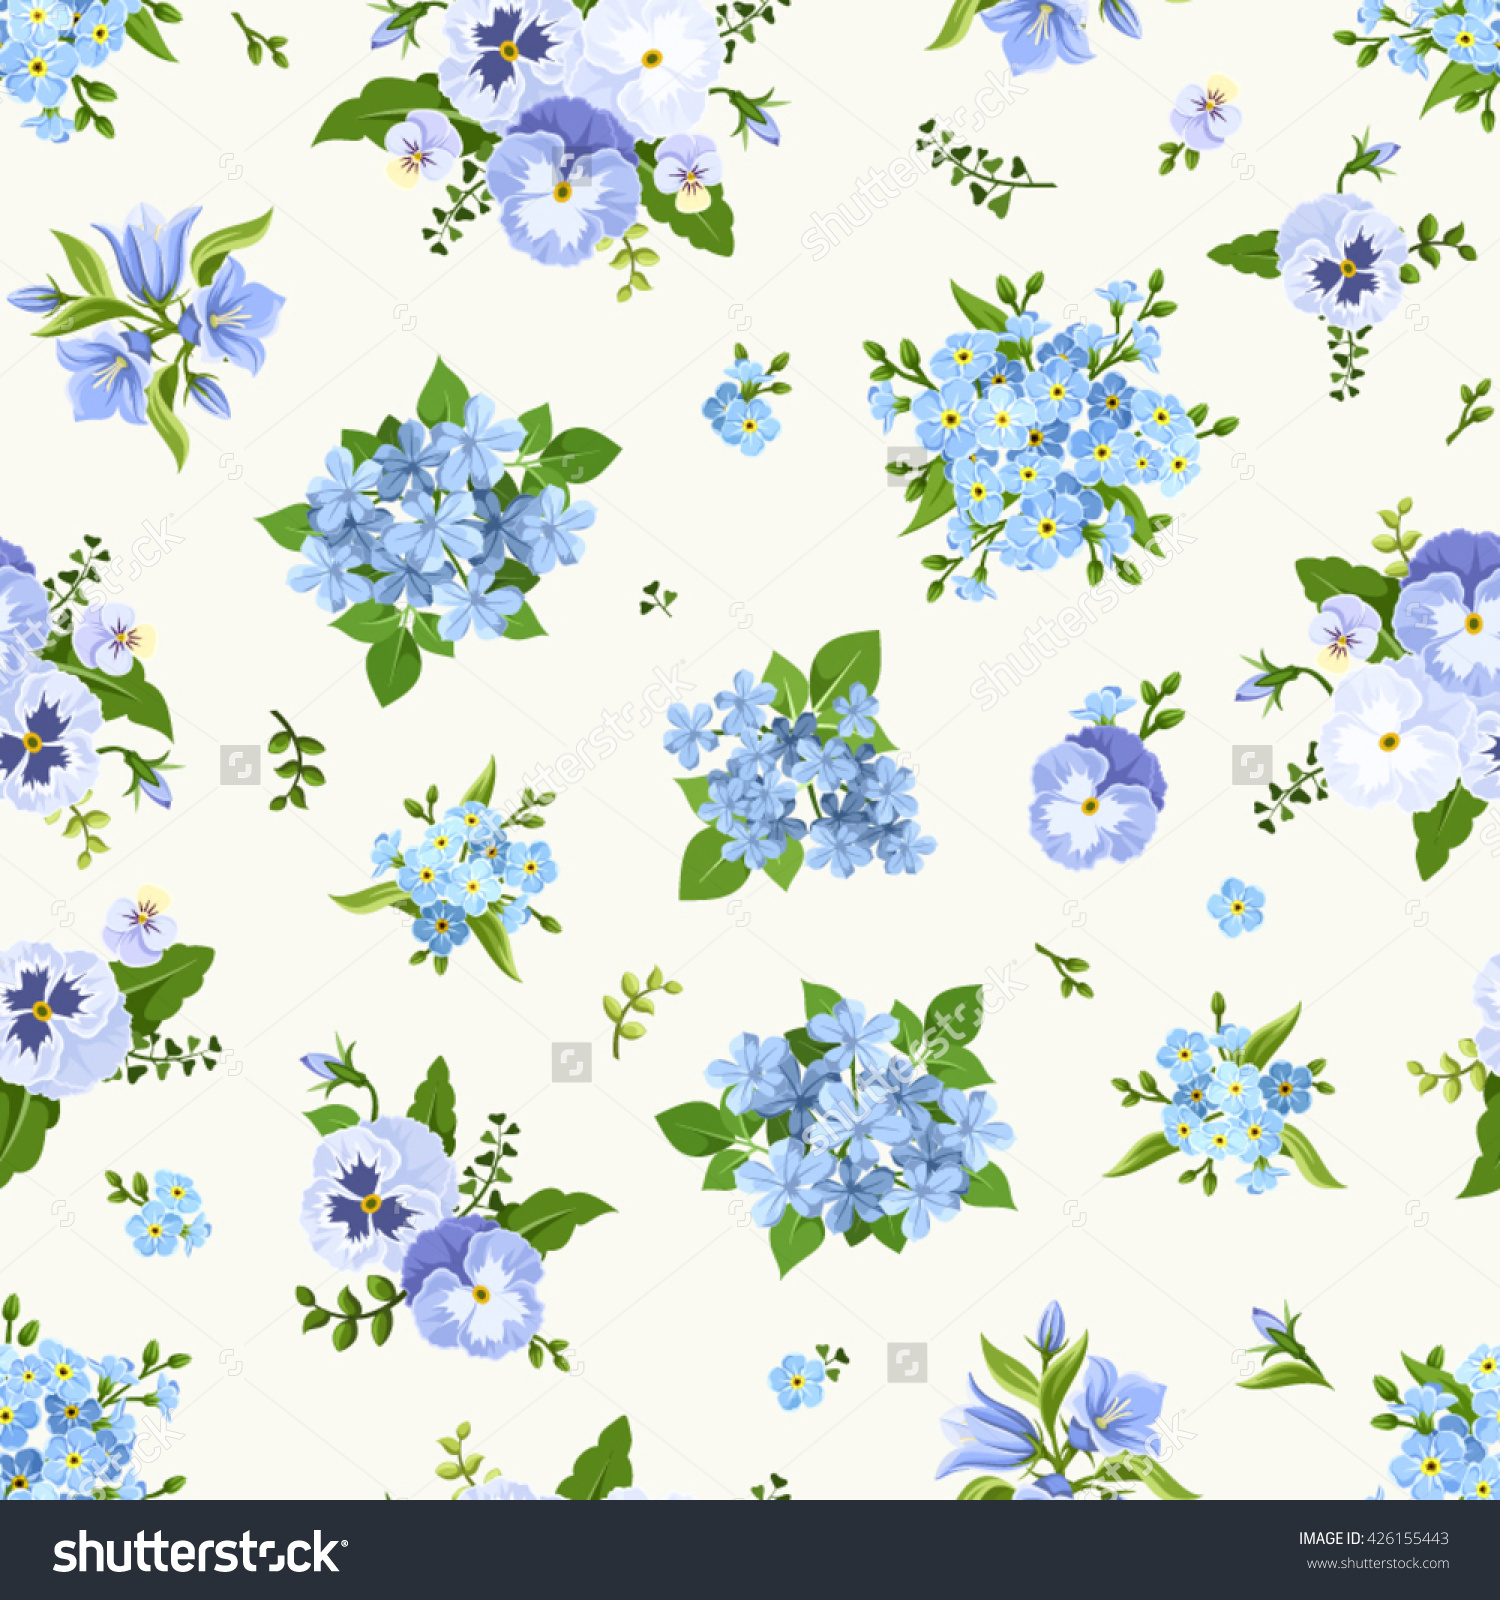 Vector Seamless Pattern With Blue Pansies, Bluebells, Plumbago And.